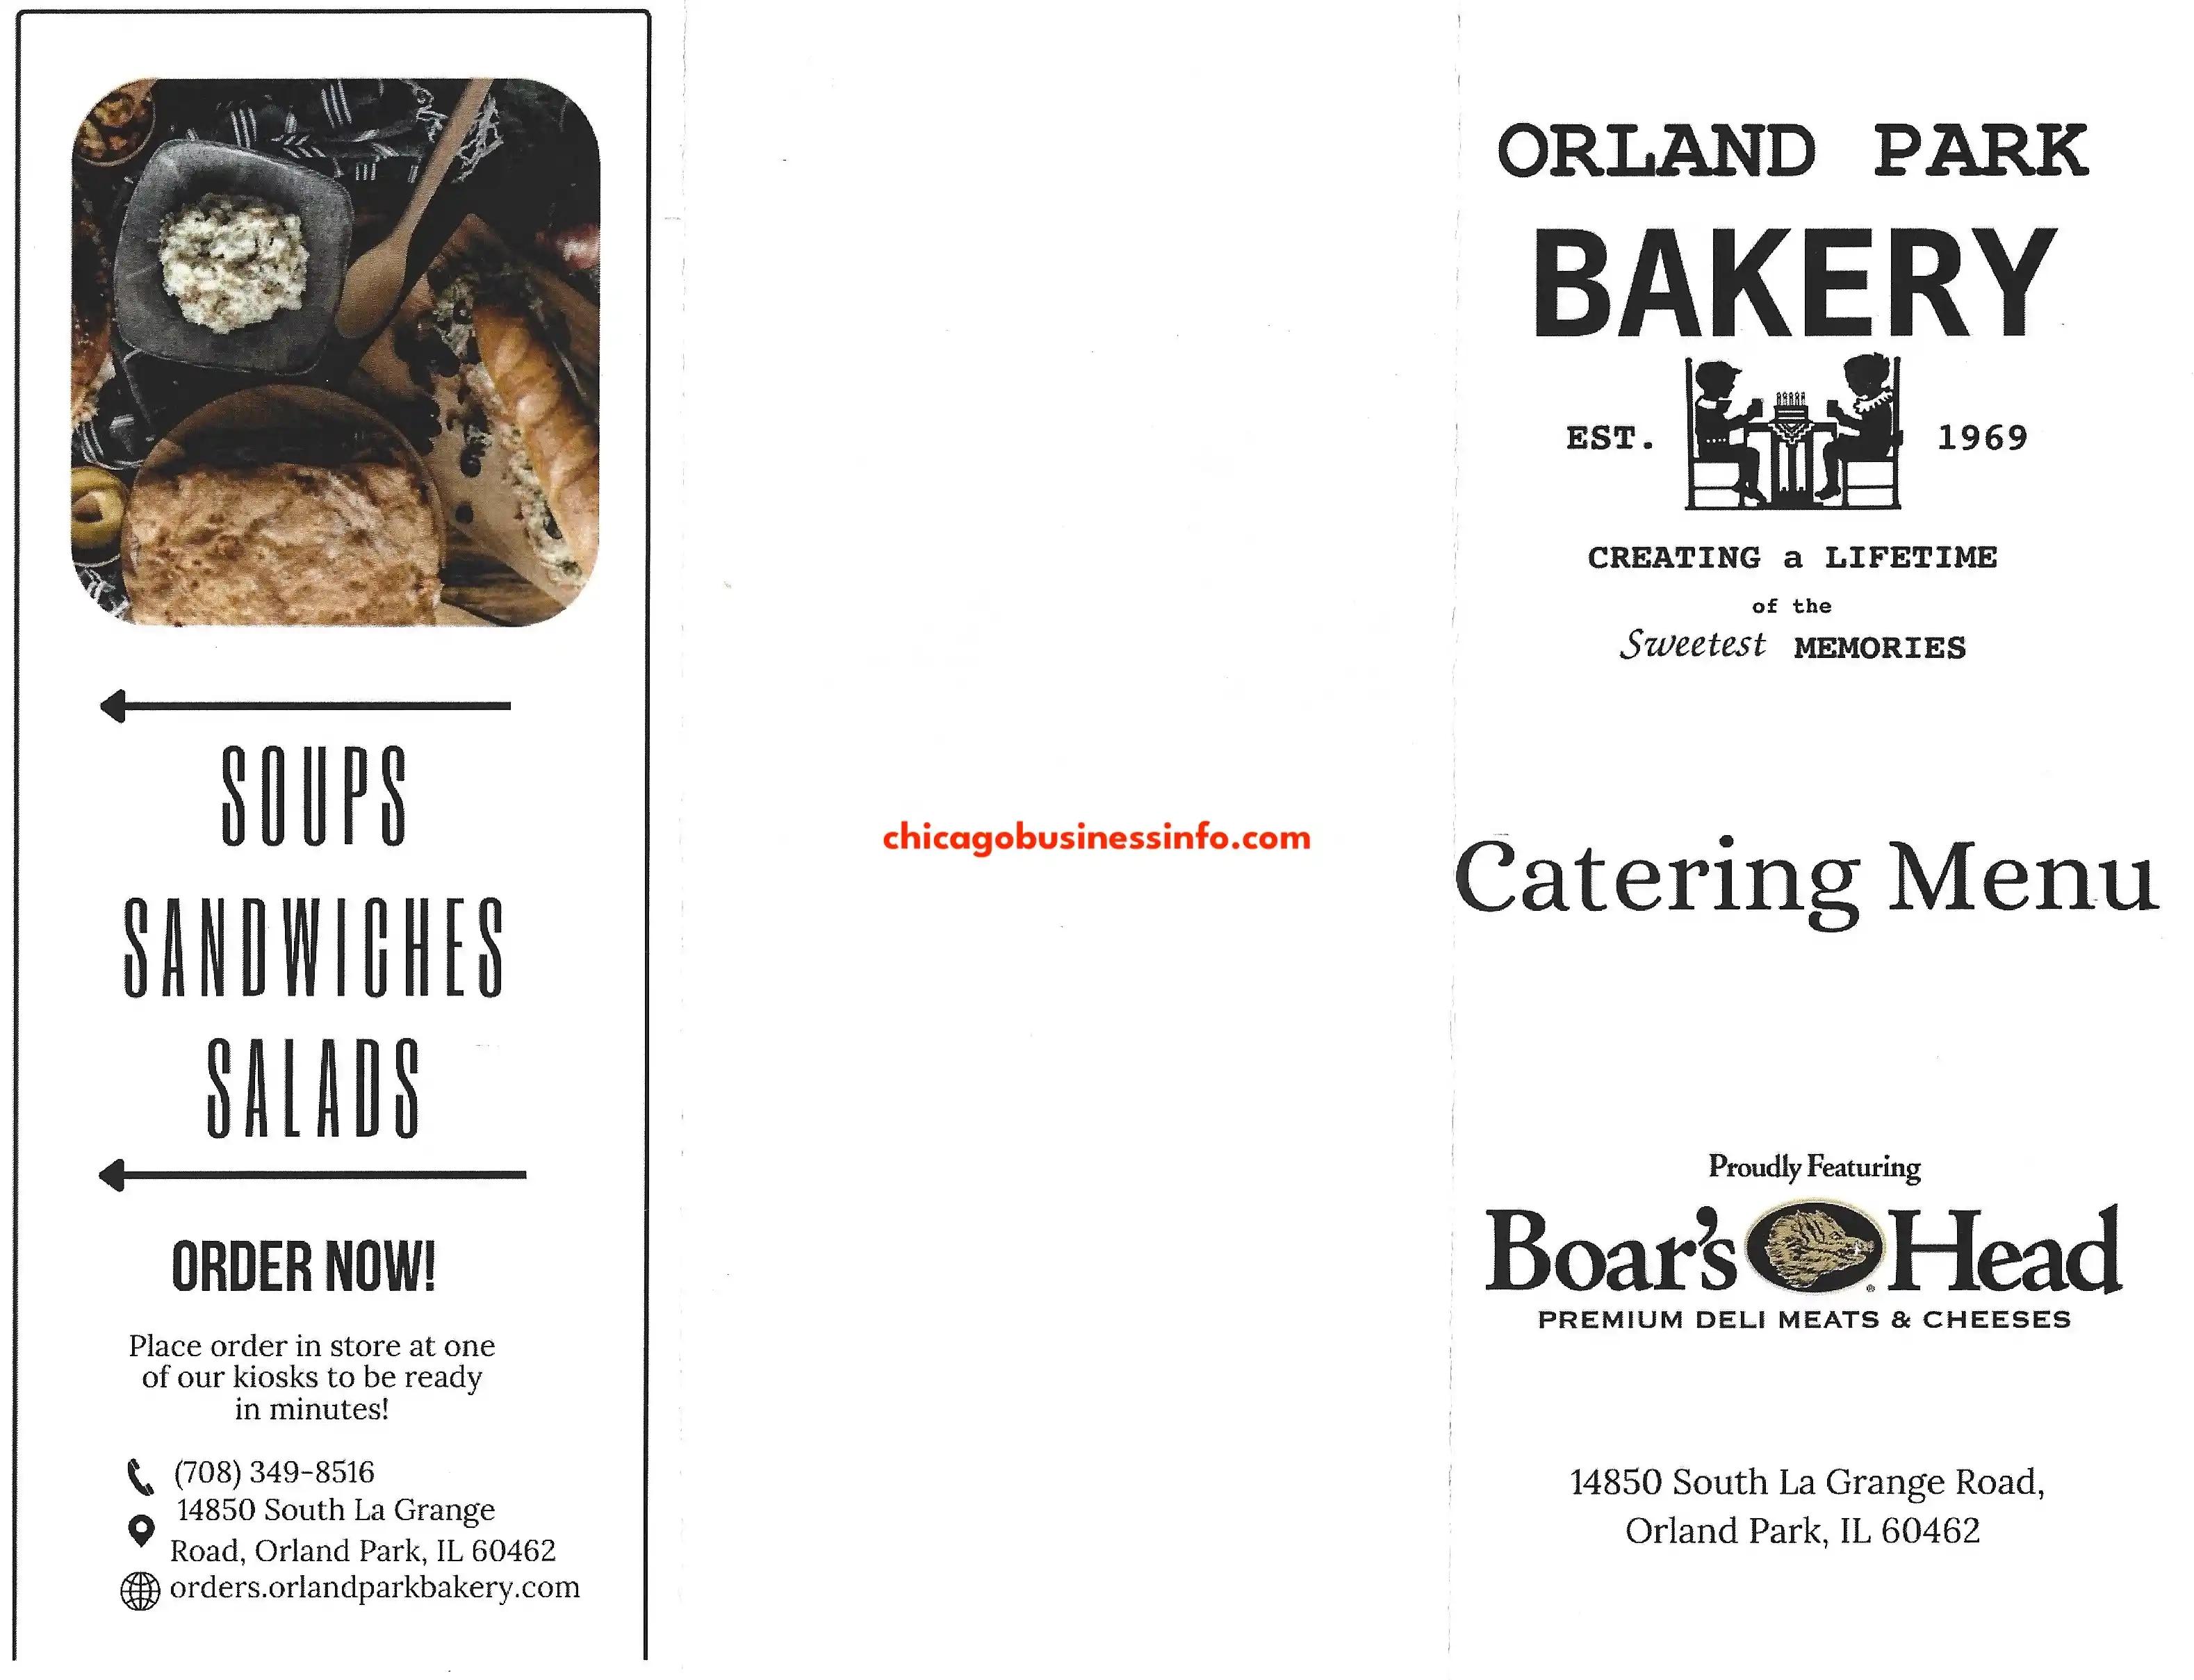 Orland Park Bakery Carry Out Catering Menu 1